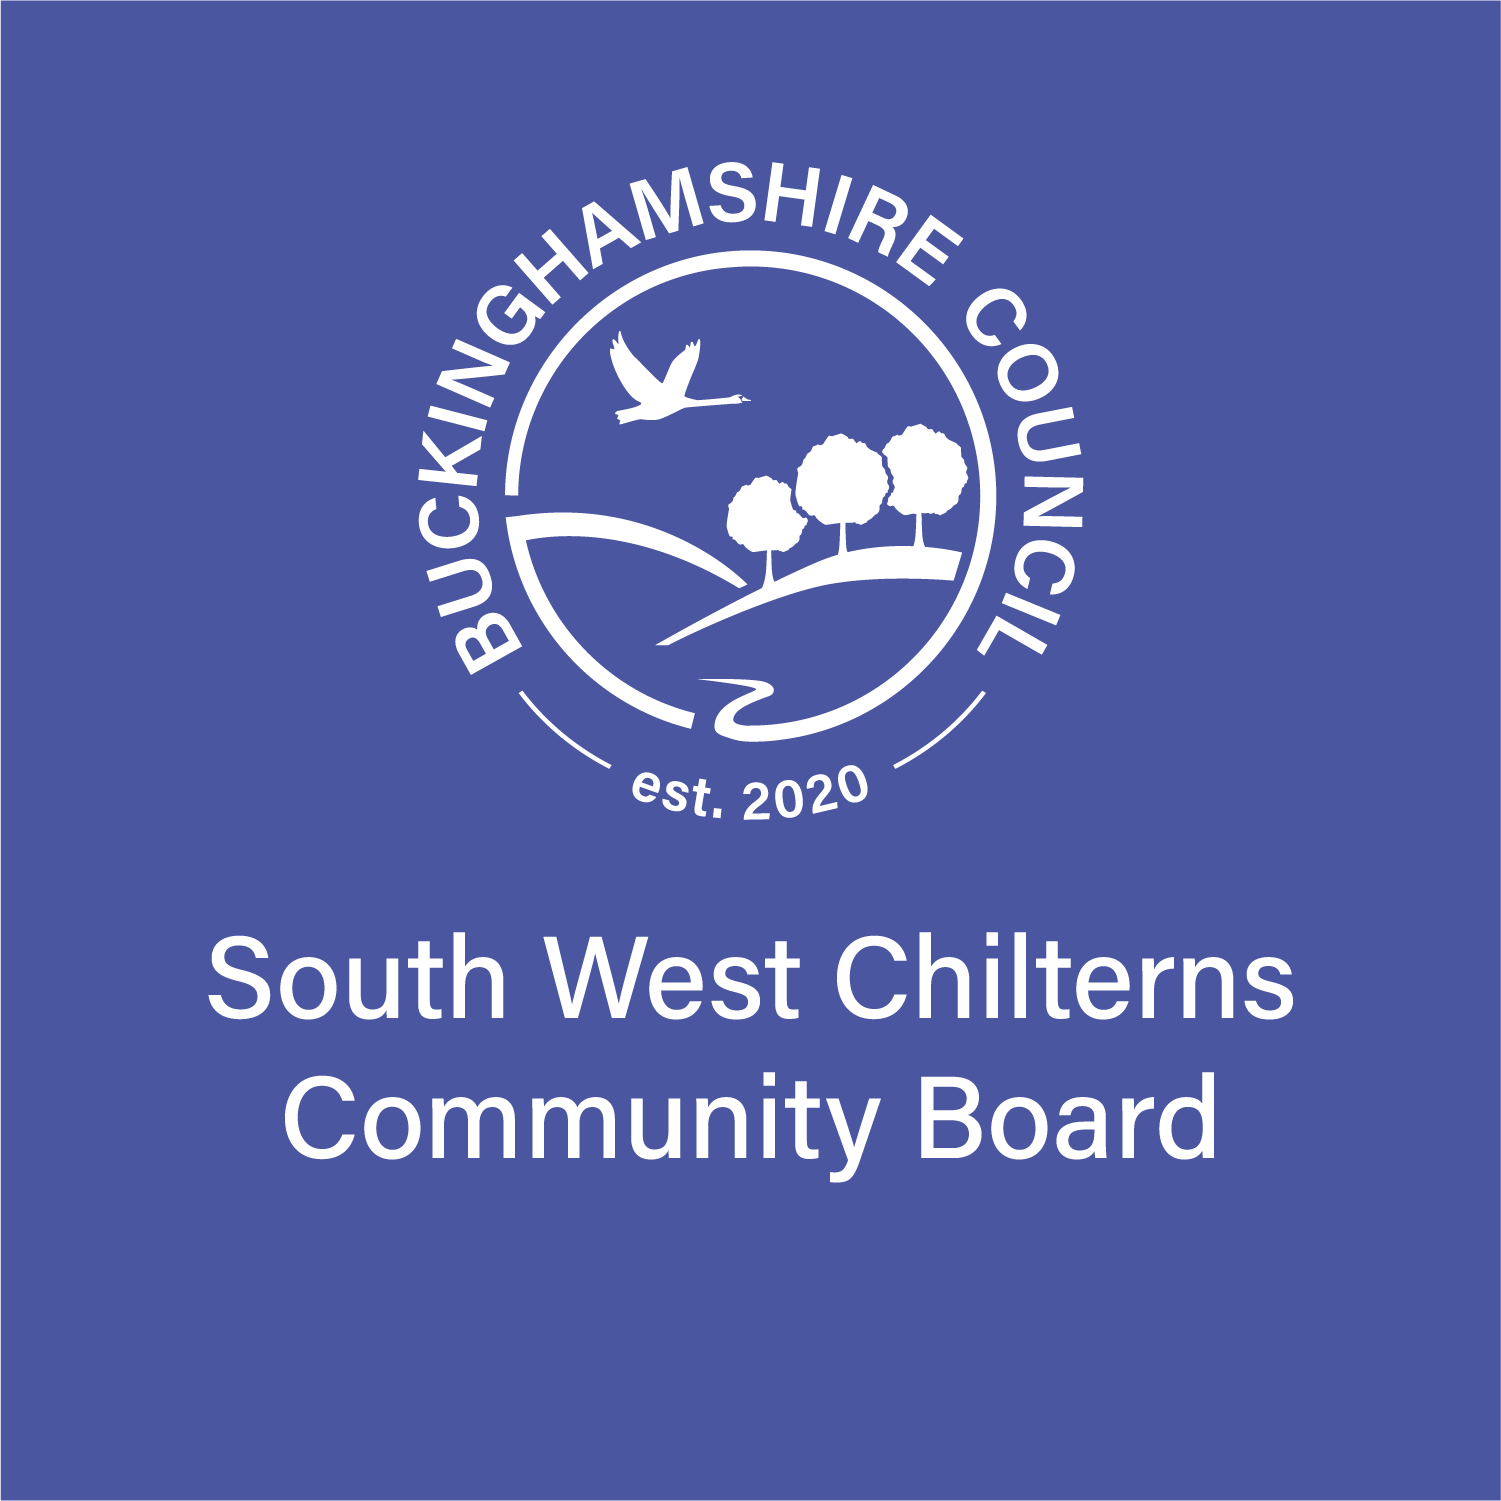 News from South West Chilterns Community Board